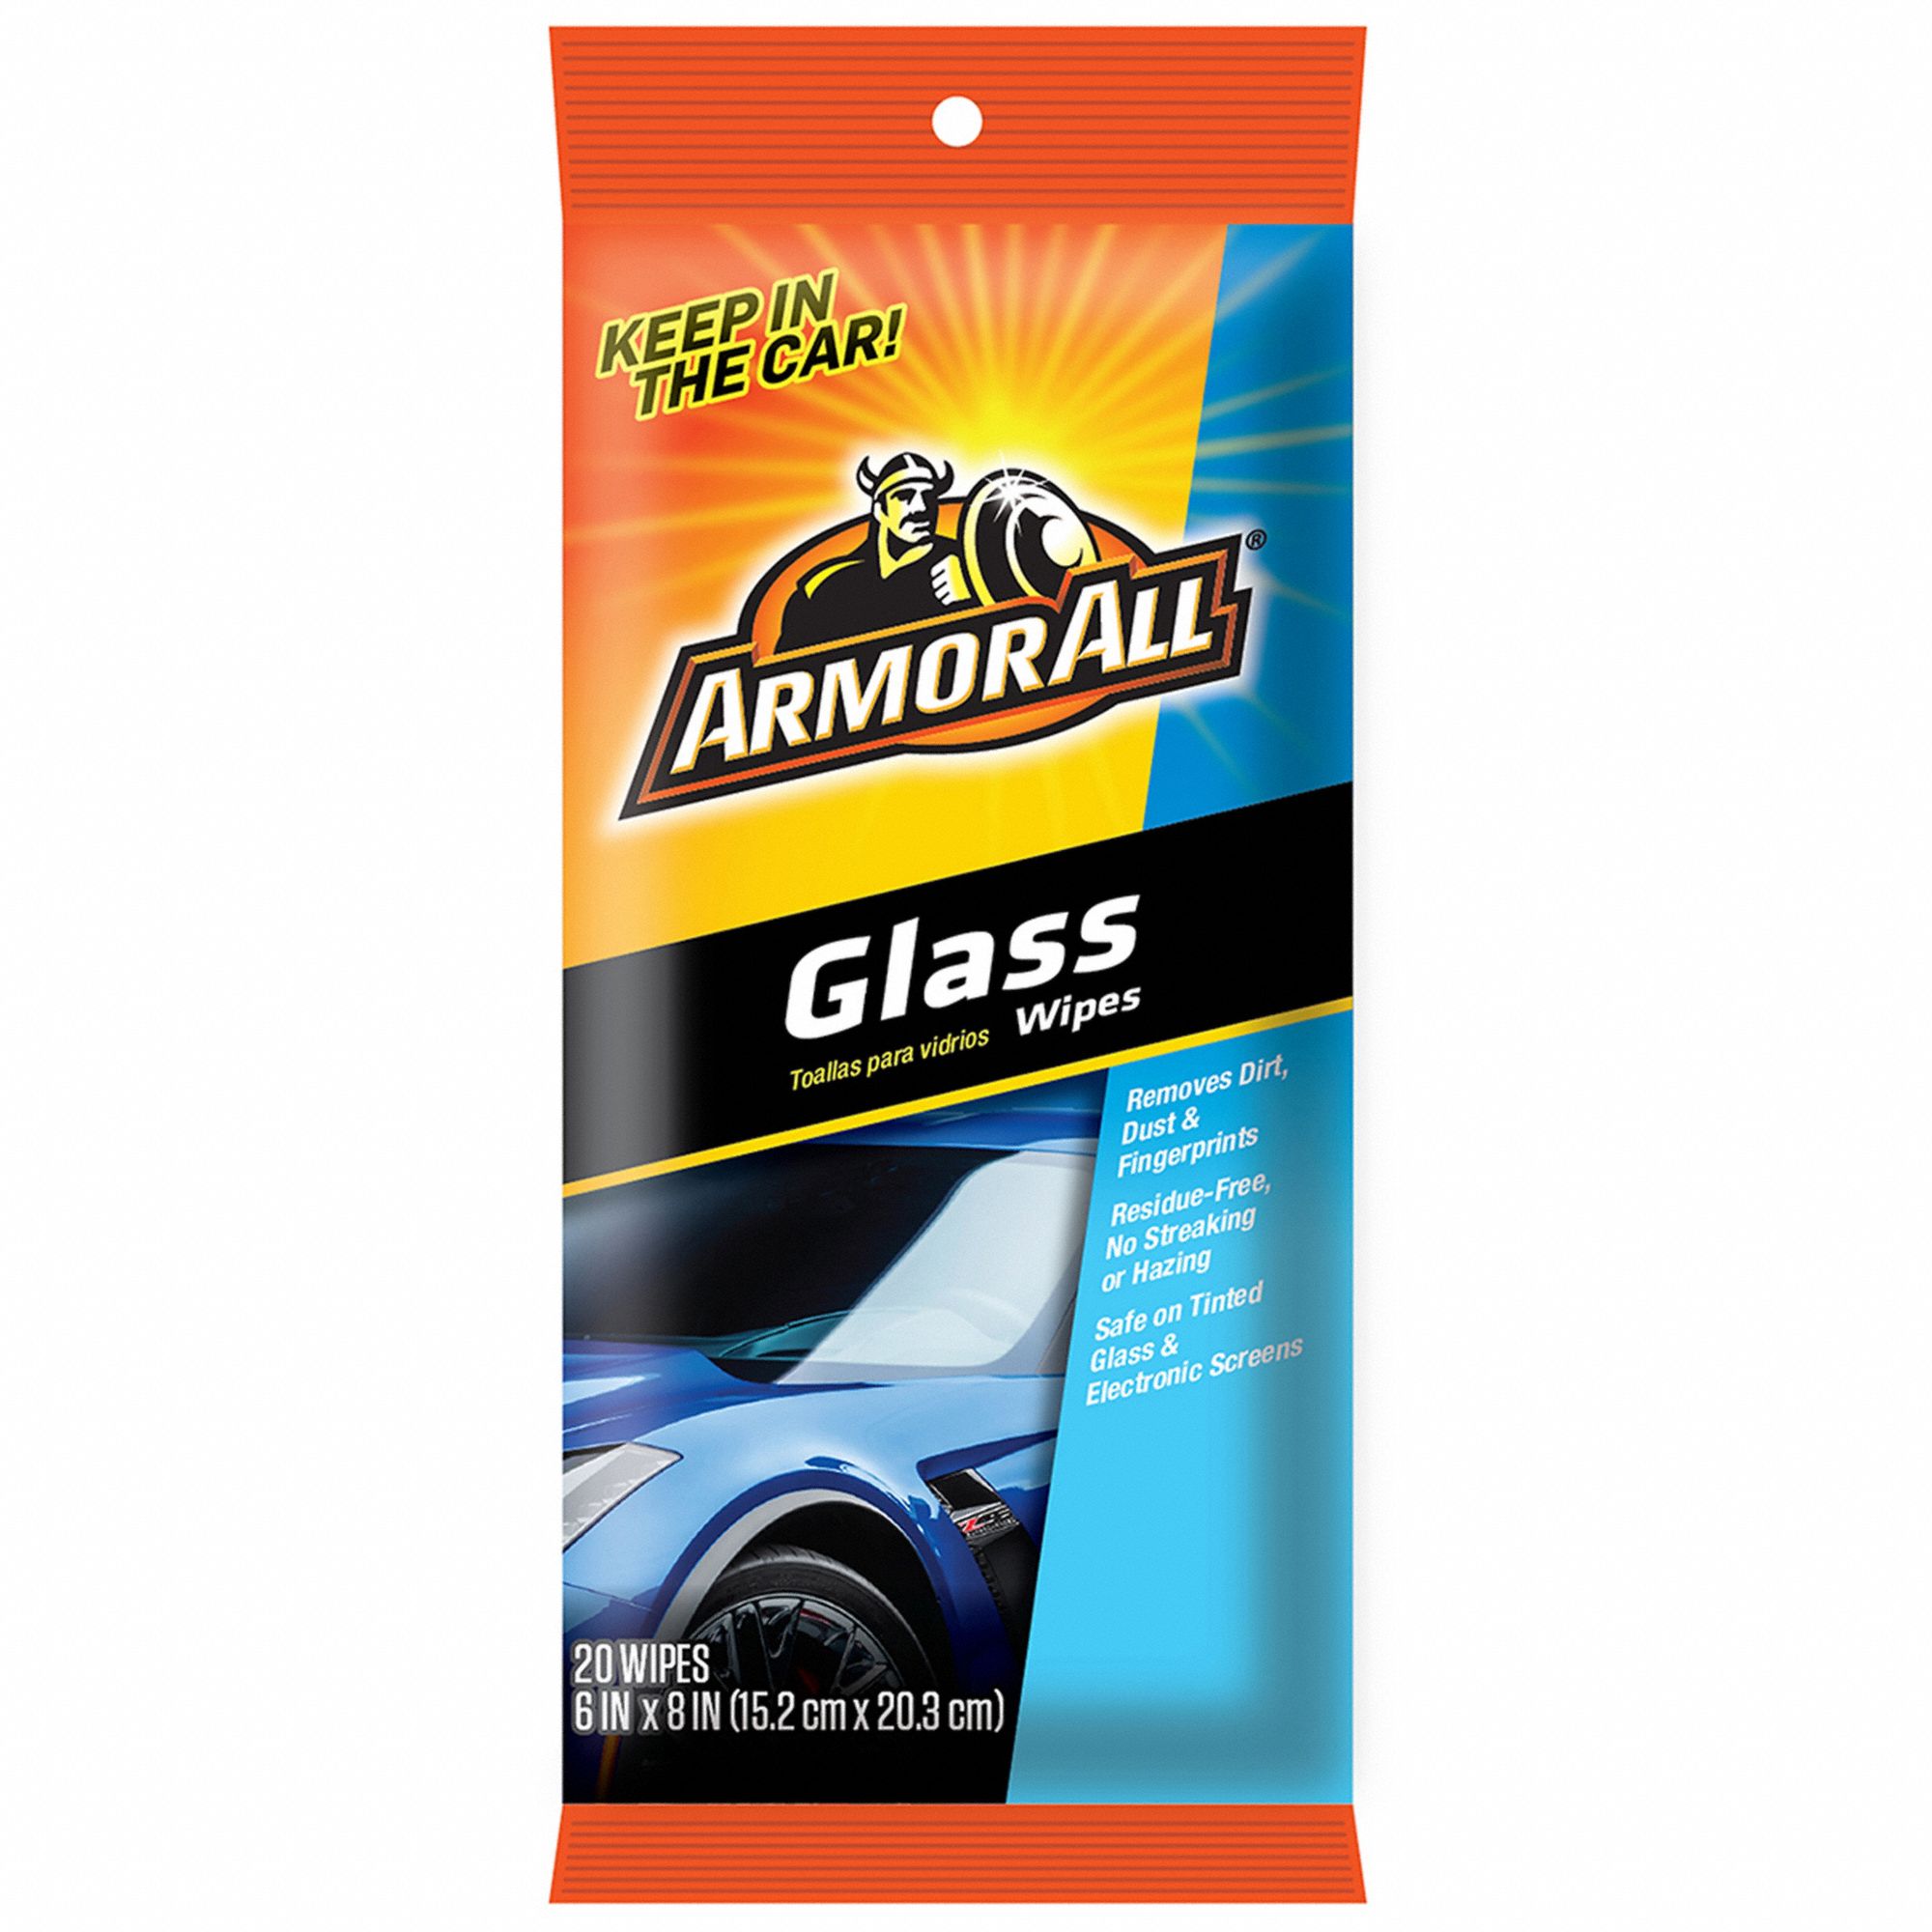 Armor All Wipes, Glass - 20 wipes